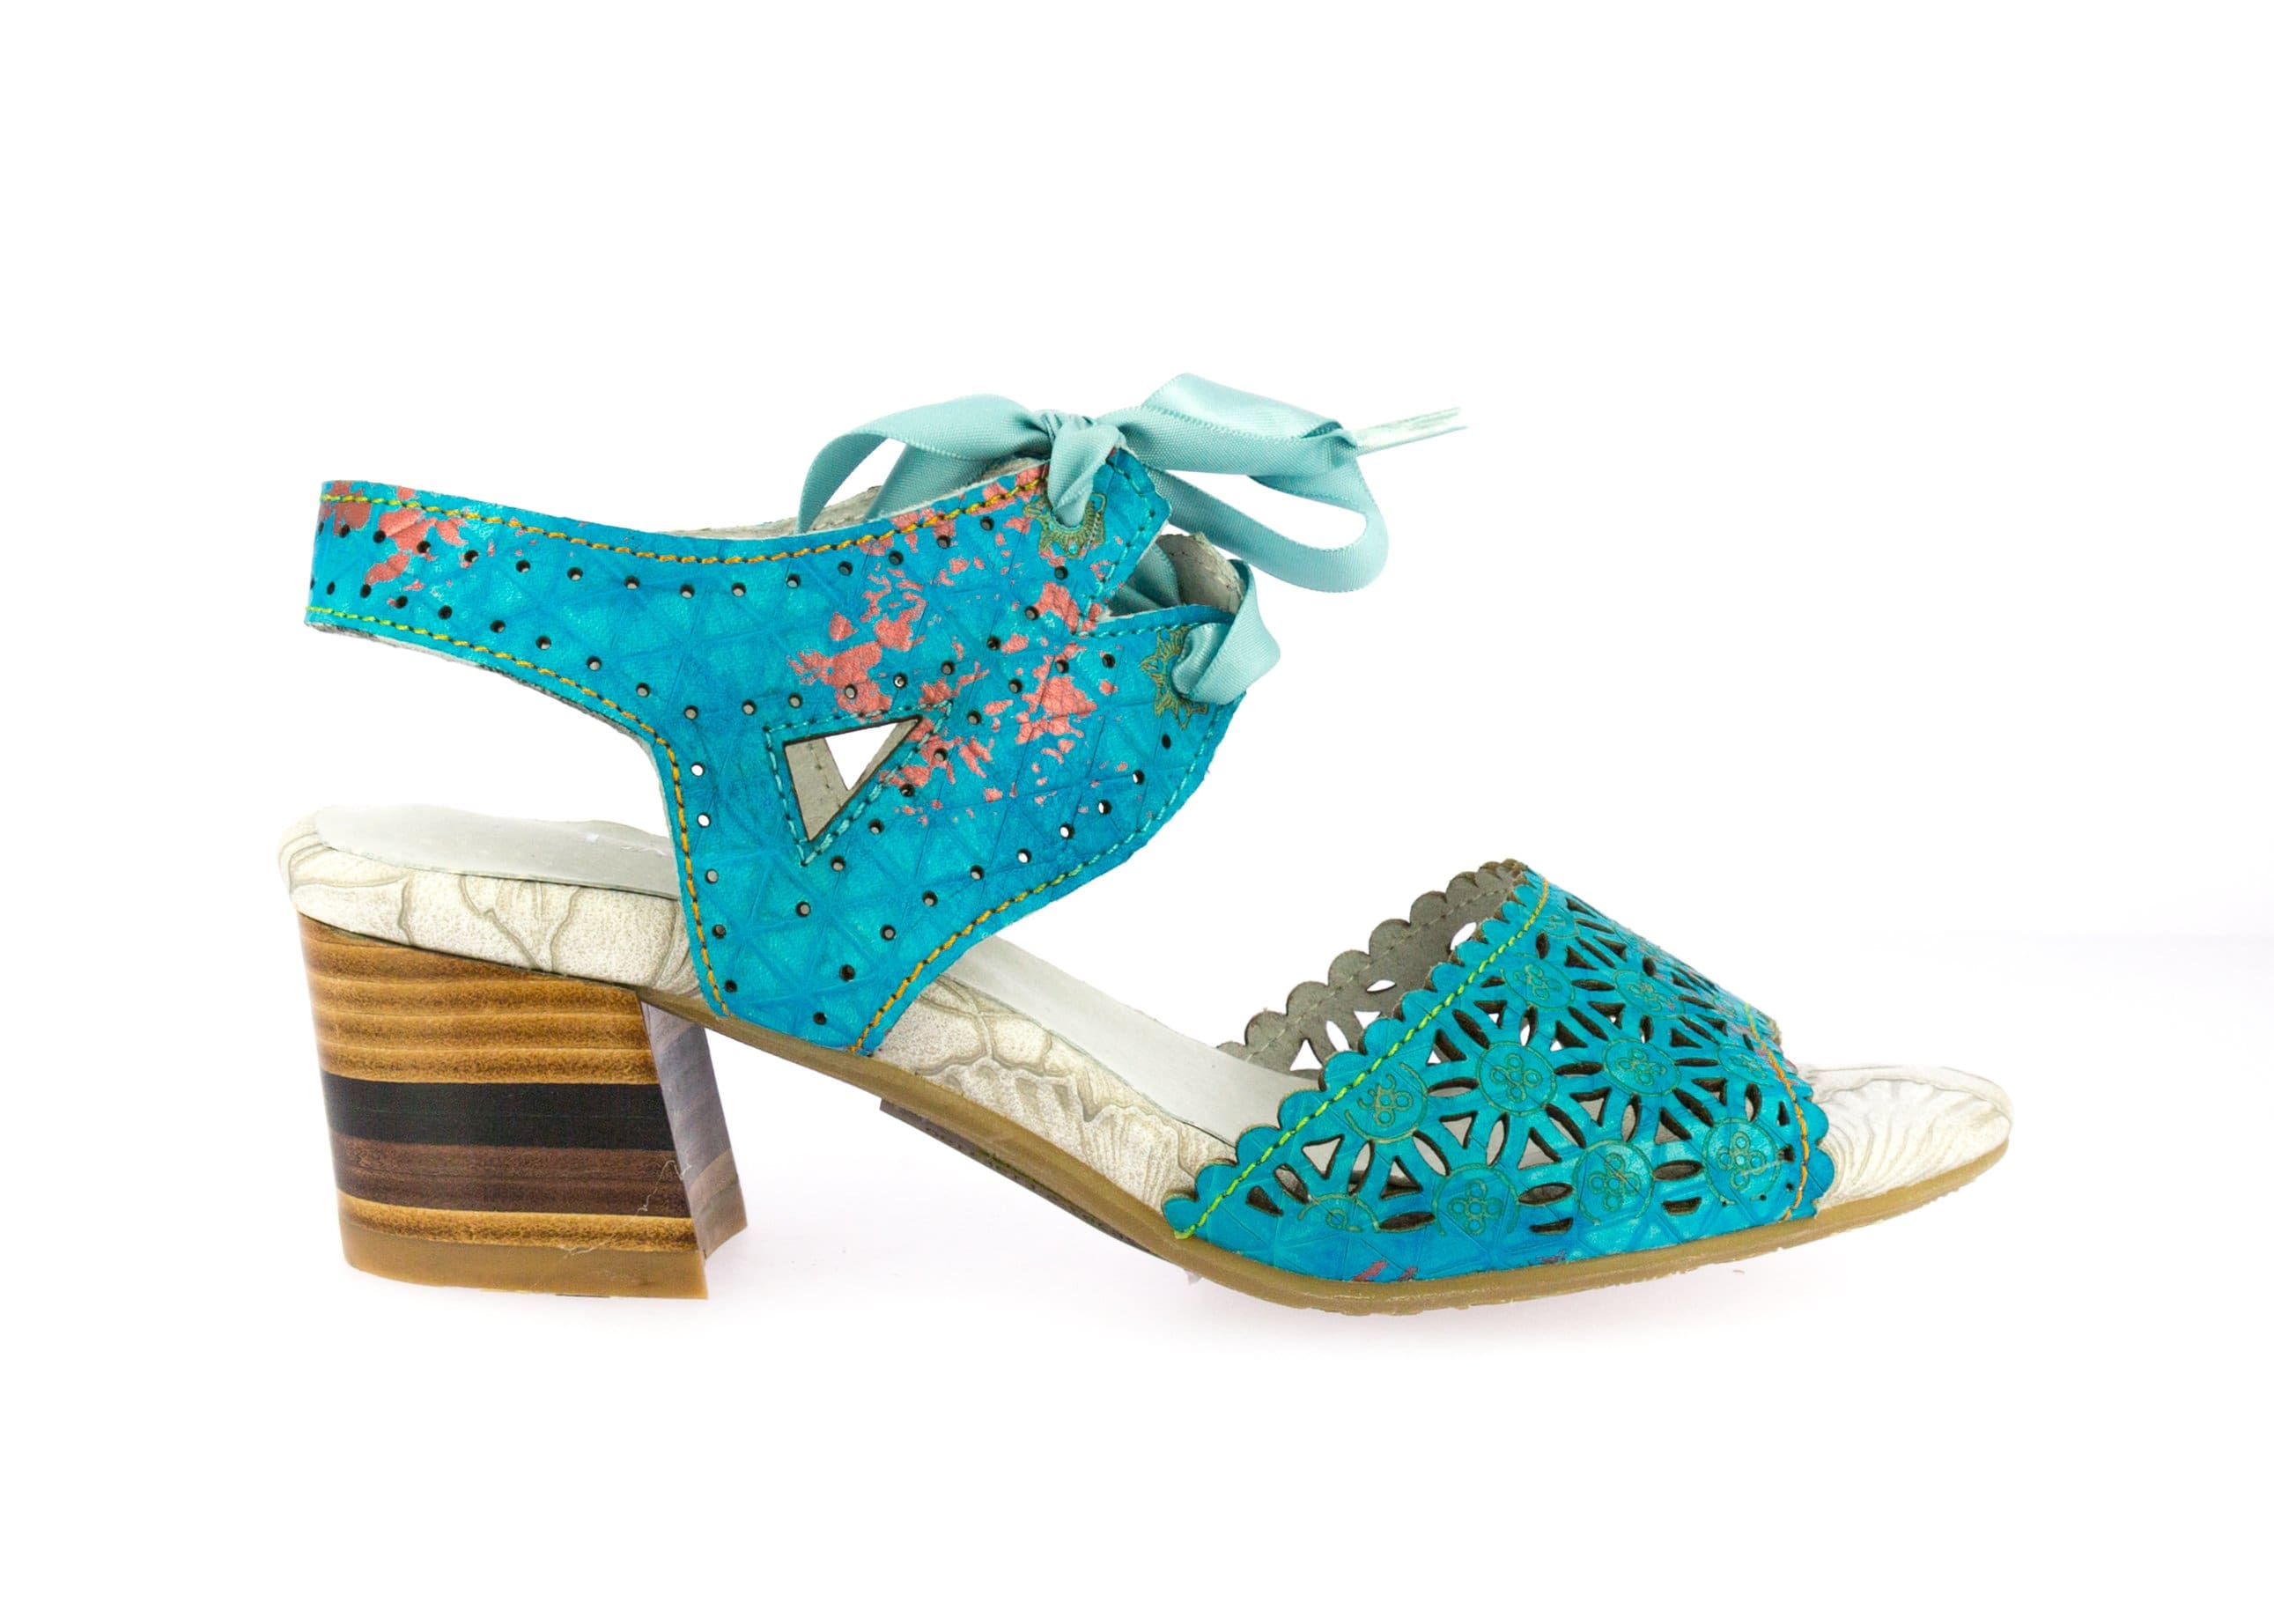 Chaussure FACNAO05 - 35 / TURQUOISE - Sandale